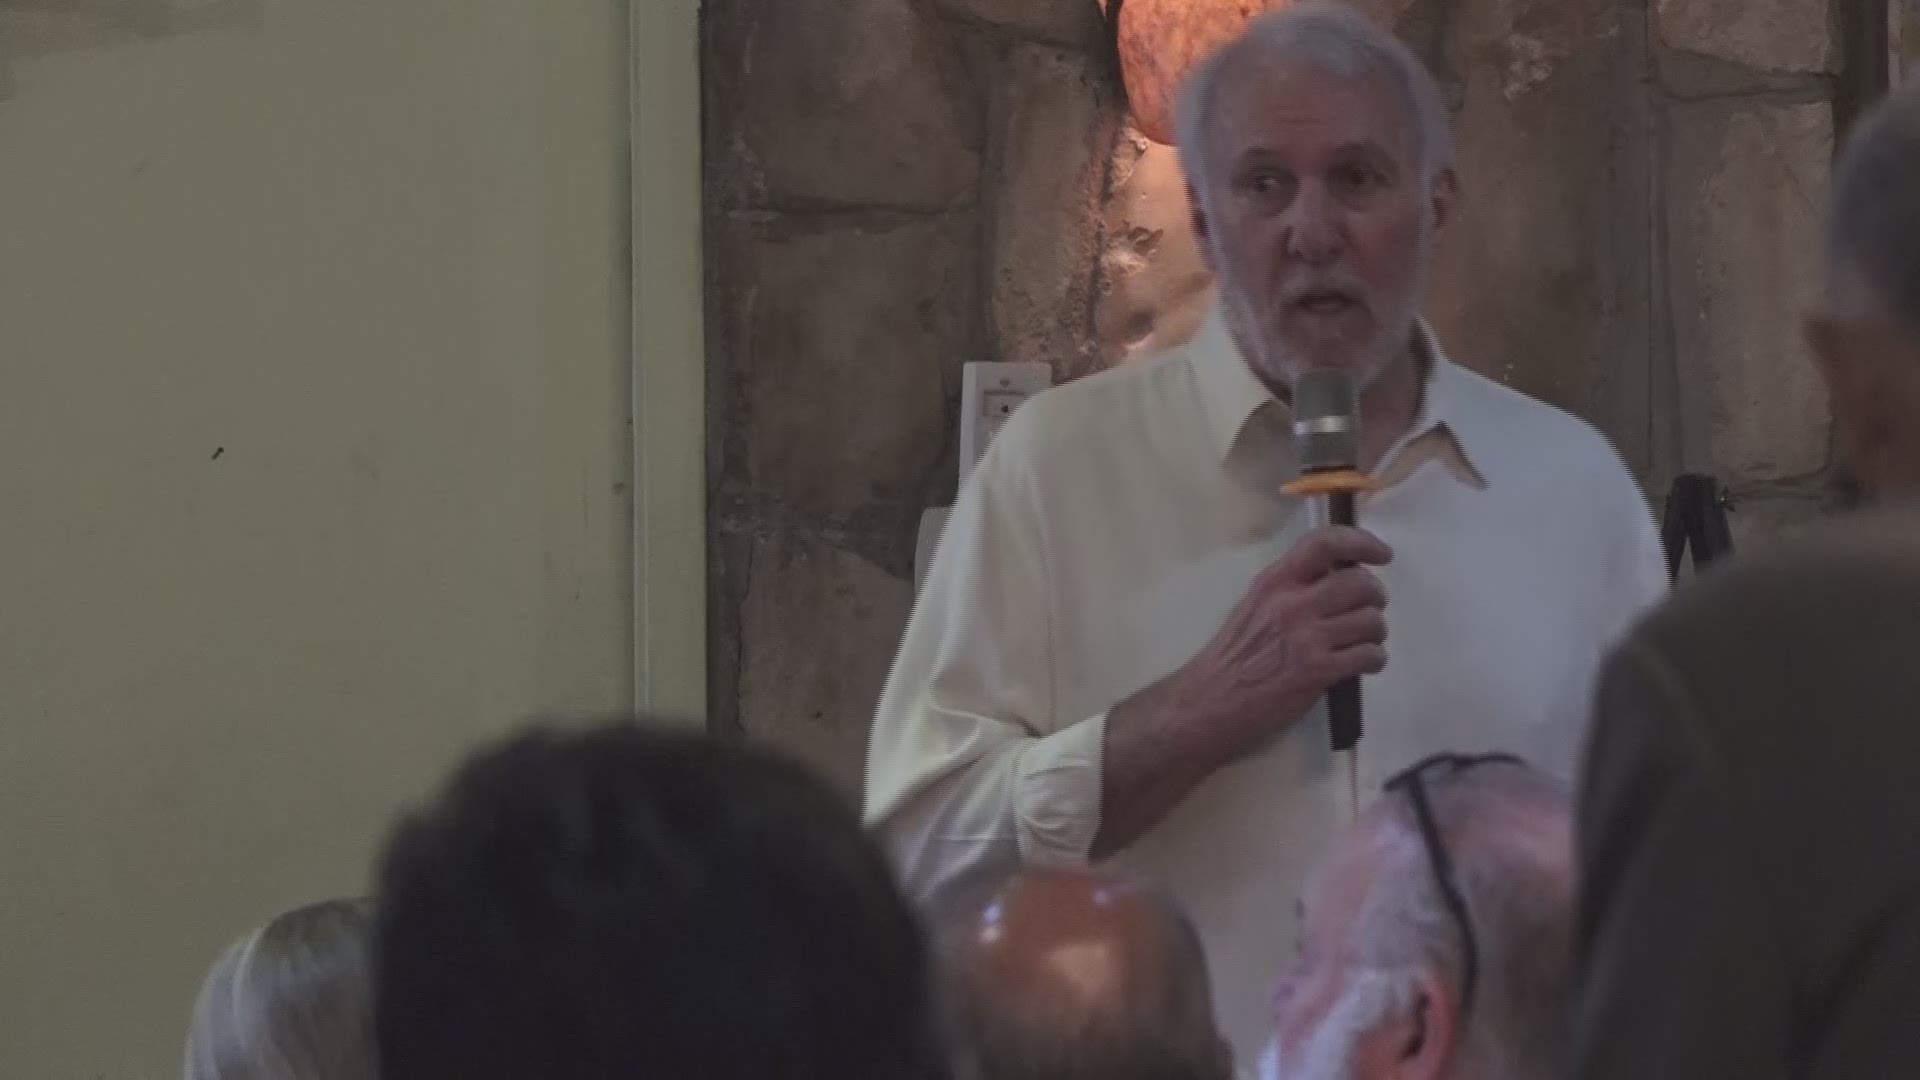 Spurs head coach Gregg Popovich spoke about the coronavirues at a fundraiser for Wish for Our Heroes in San Antonio.